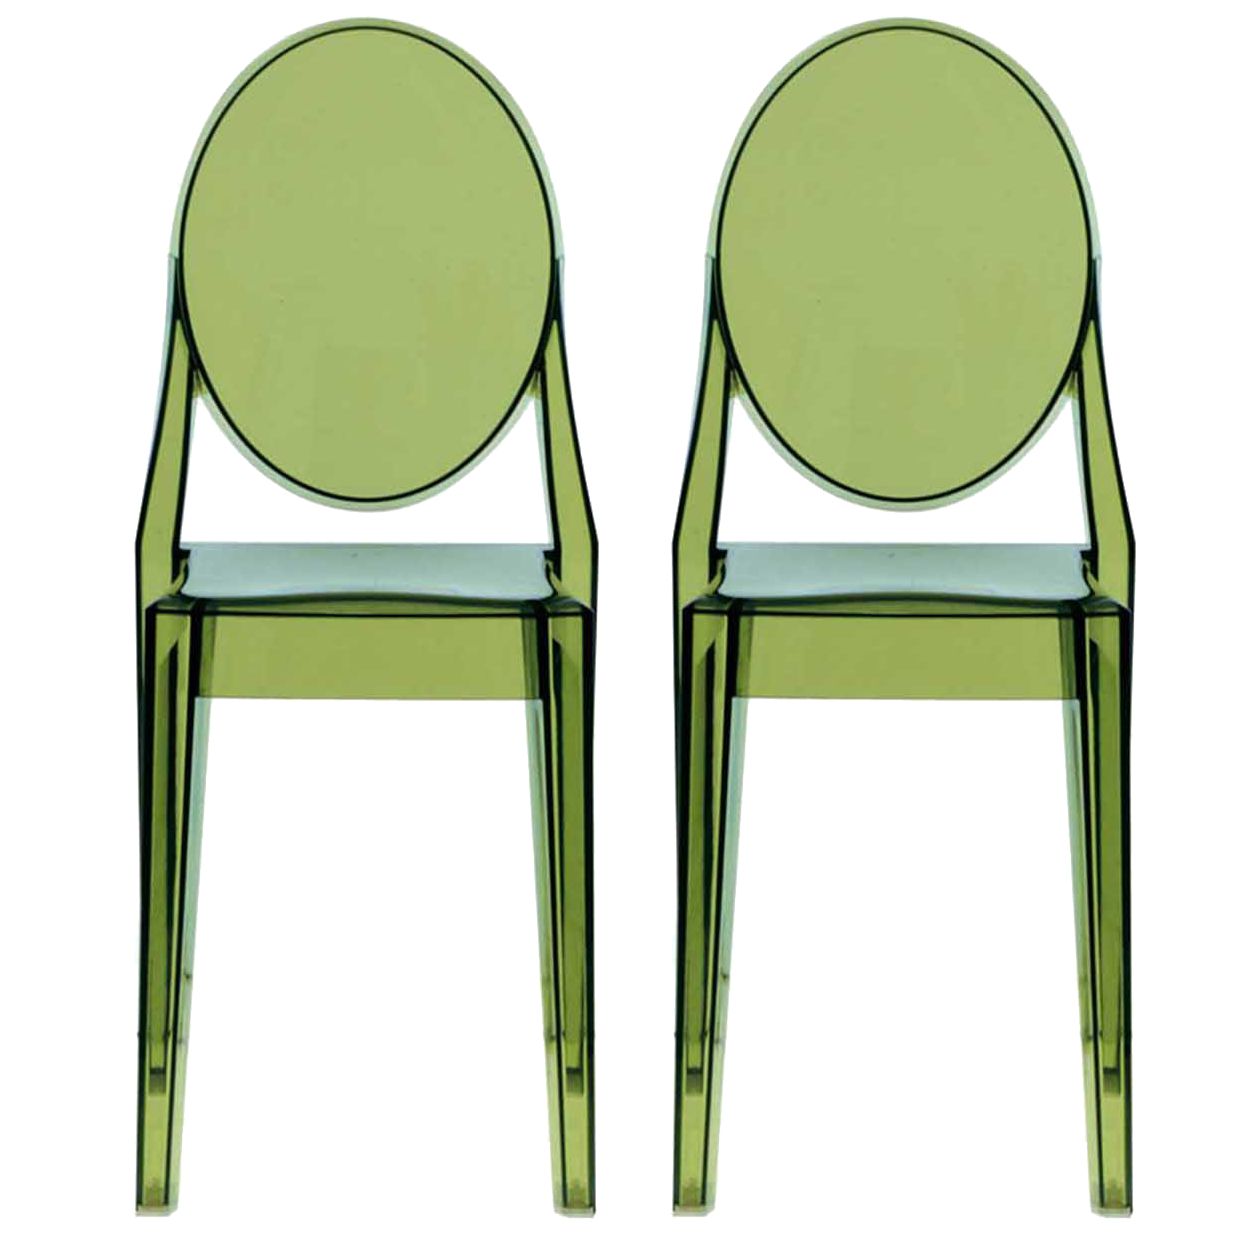 Philippe Starck for Kartell Victoria Ghost Chair, Green, Pair at John Lewis